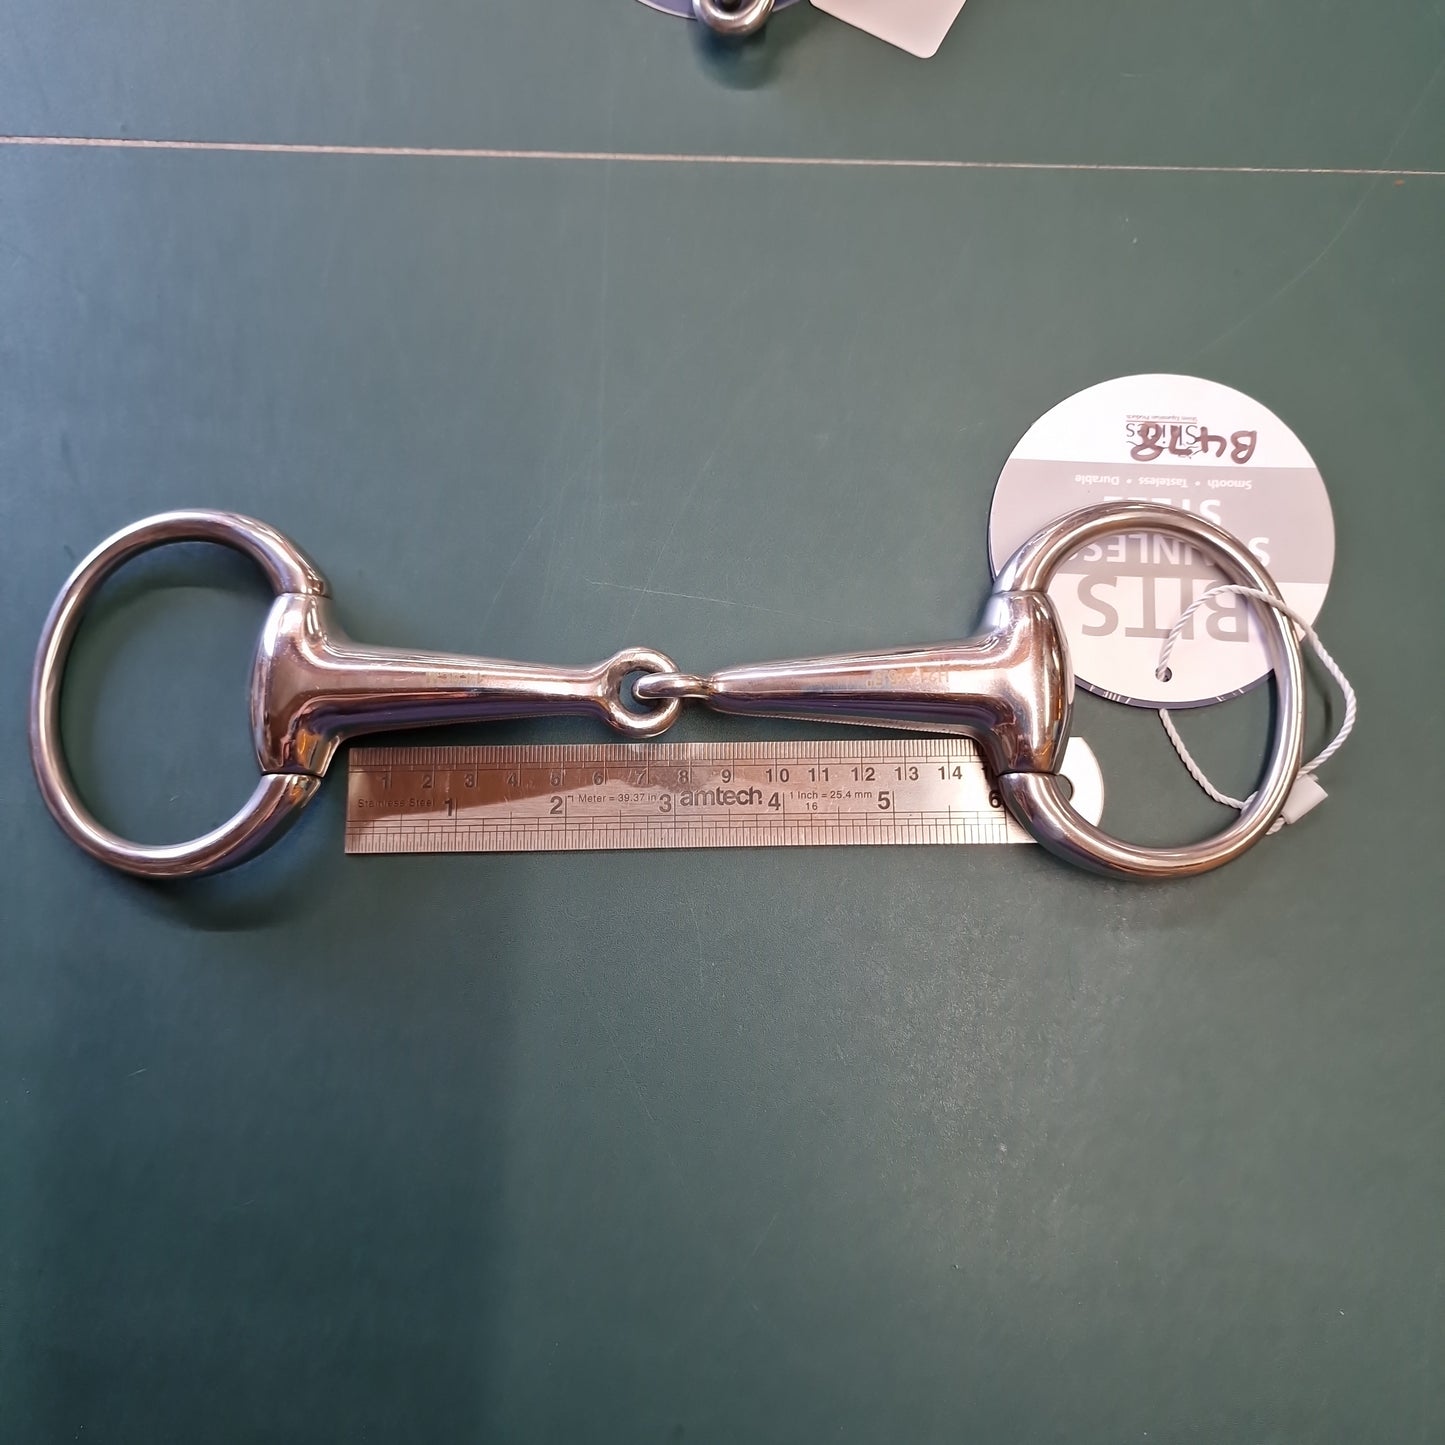 5.5" Shires Eggbutt Hollow Jointed snaffle bit B478